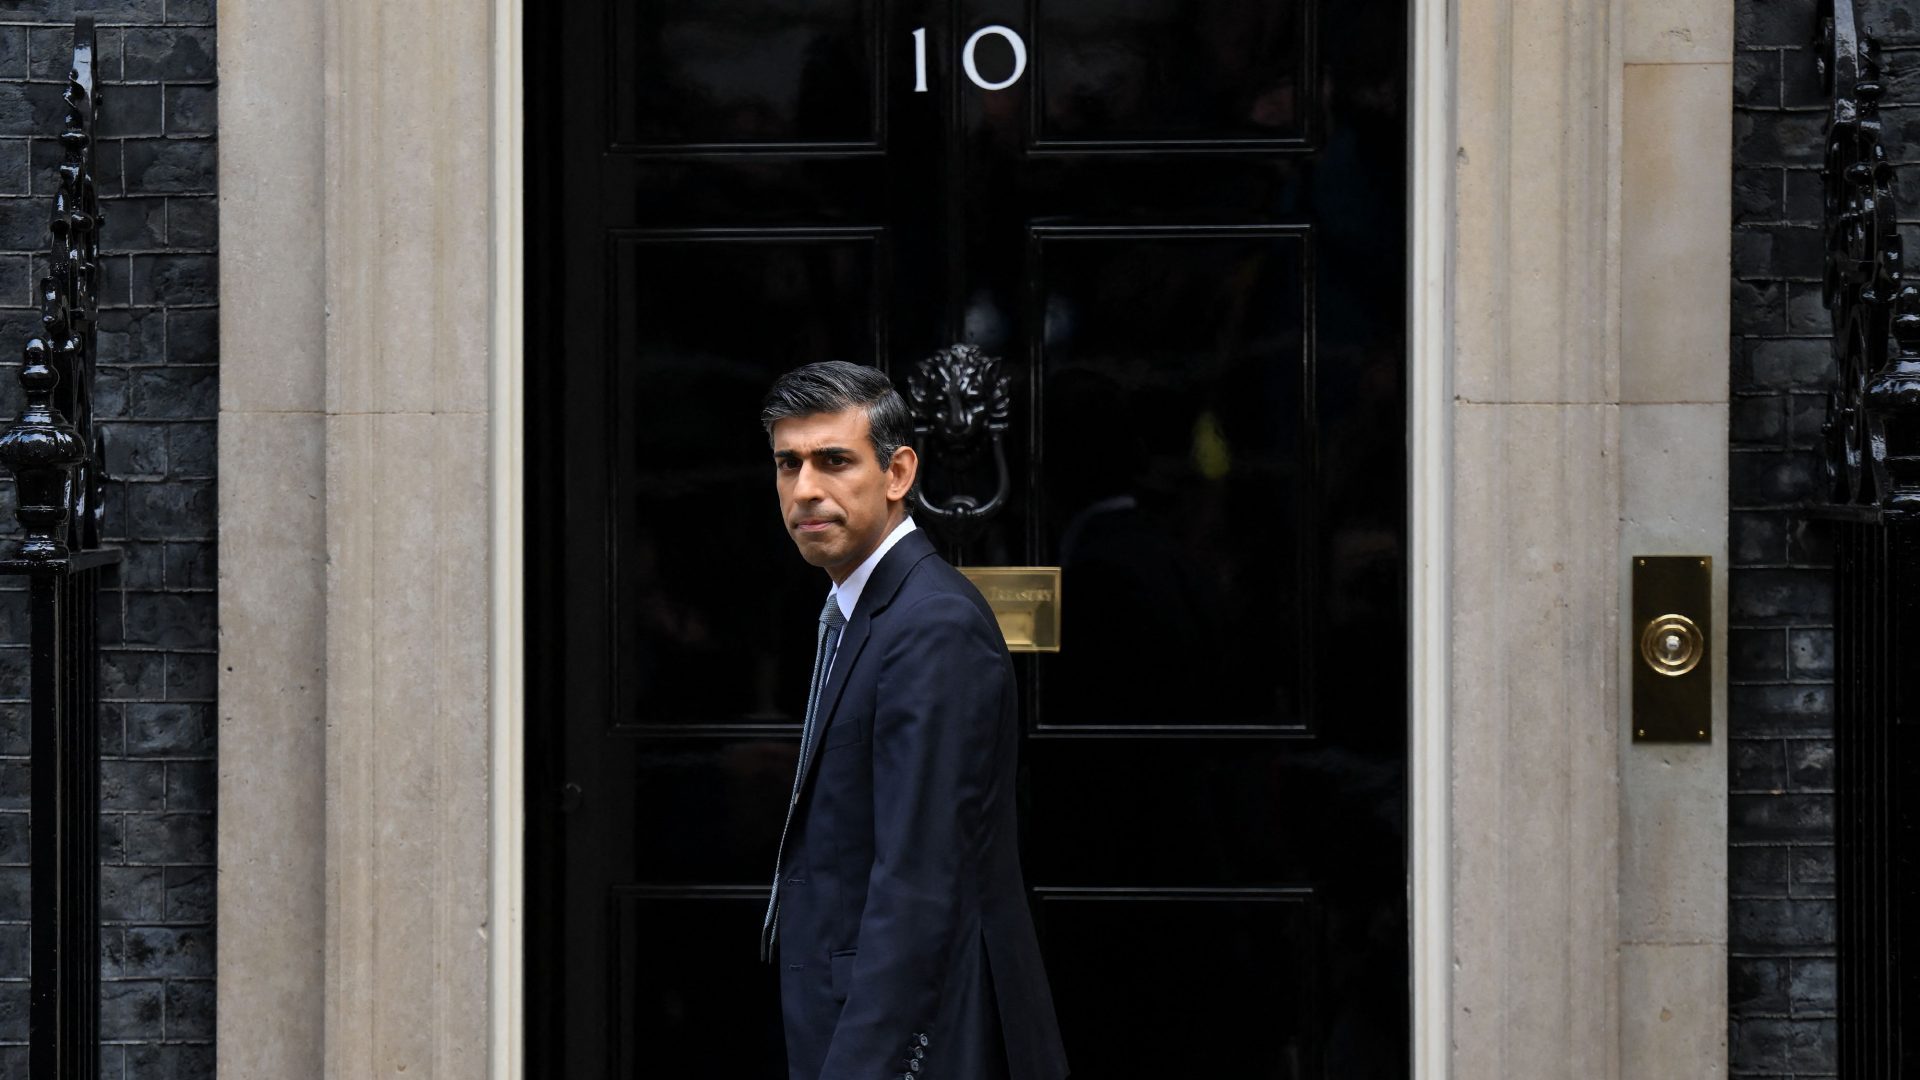 Rishi Sunak soon after becoming PM; he now appears unable to corral the different factions within his party. Photo: Daniel Leal/AFP/Getty